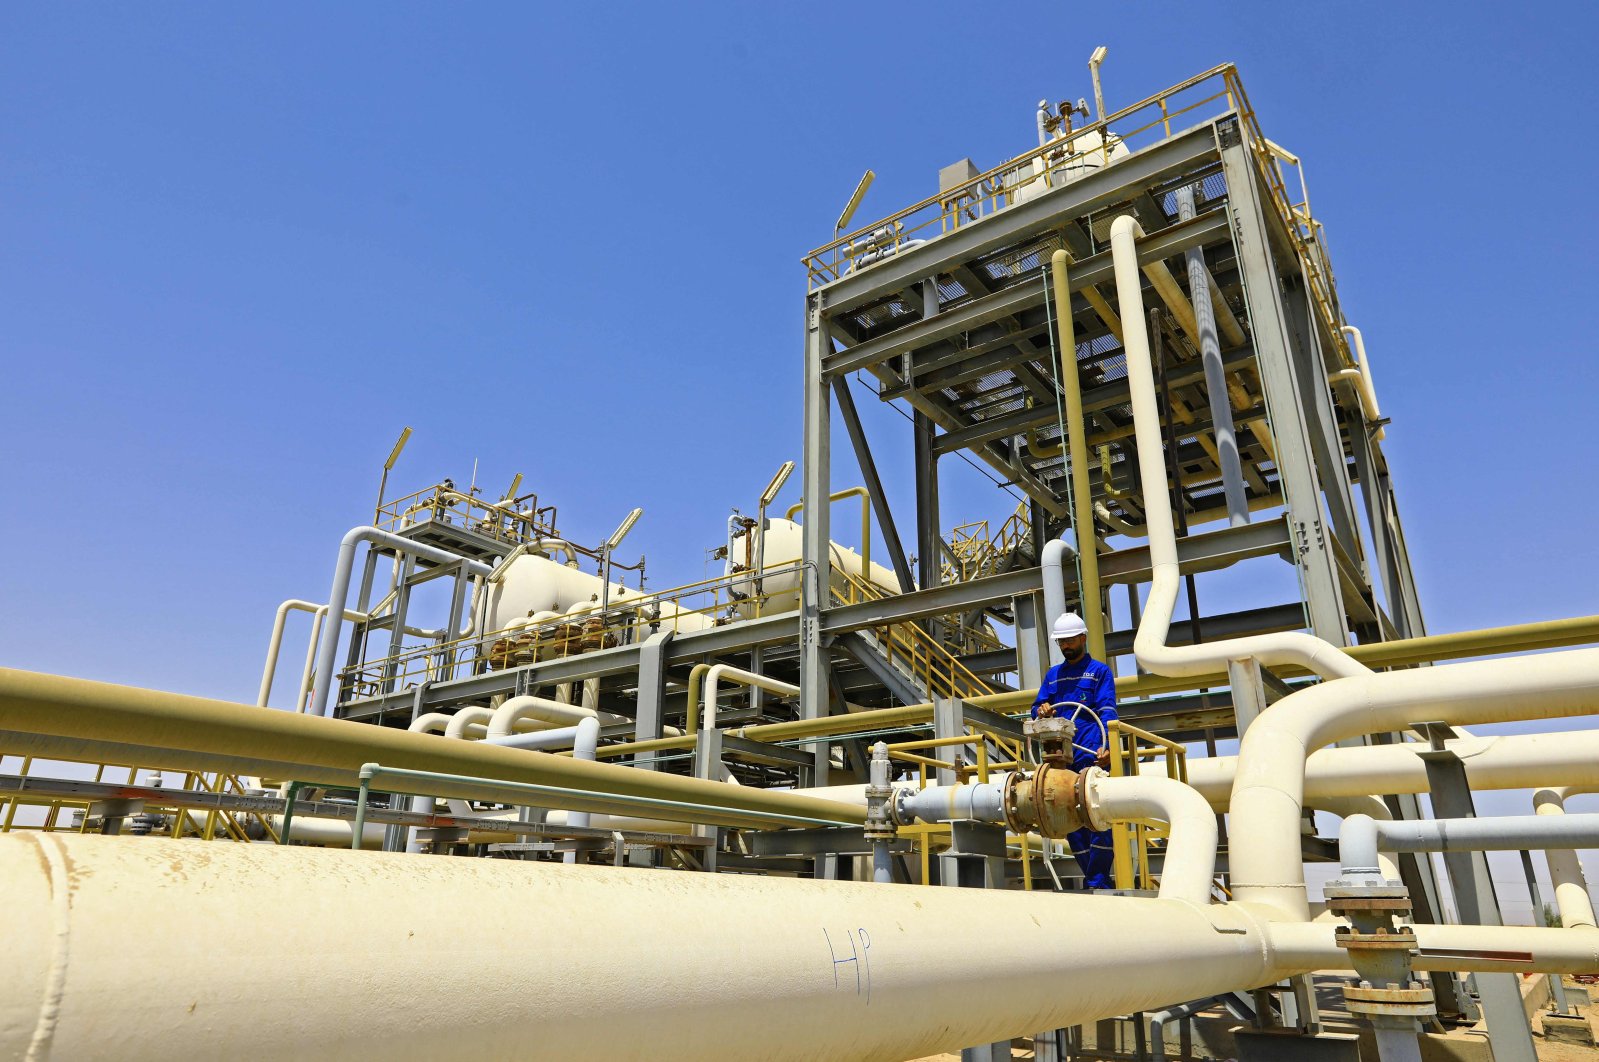 An employee works at the Siba oil field in Dhi Qar Governorate, Iraq, Aug. 22, 2022. (AFP Photo)